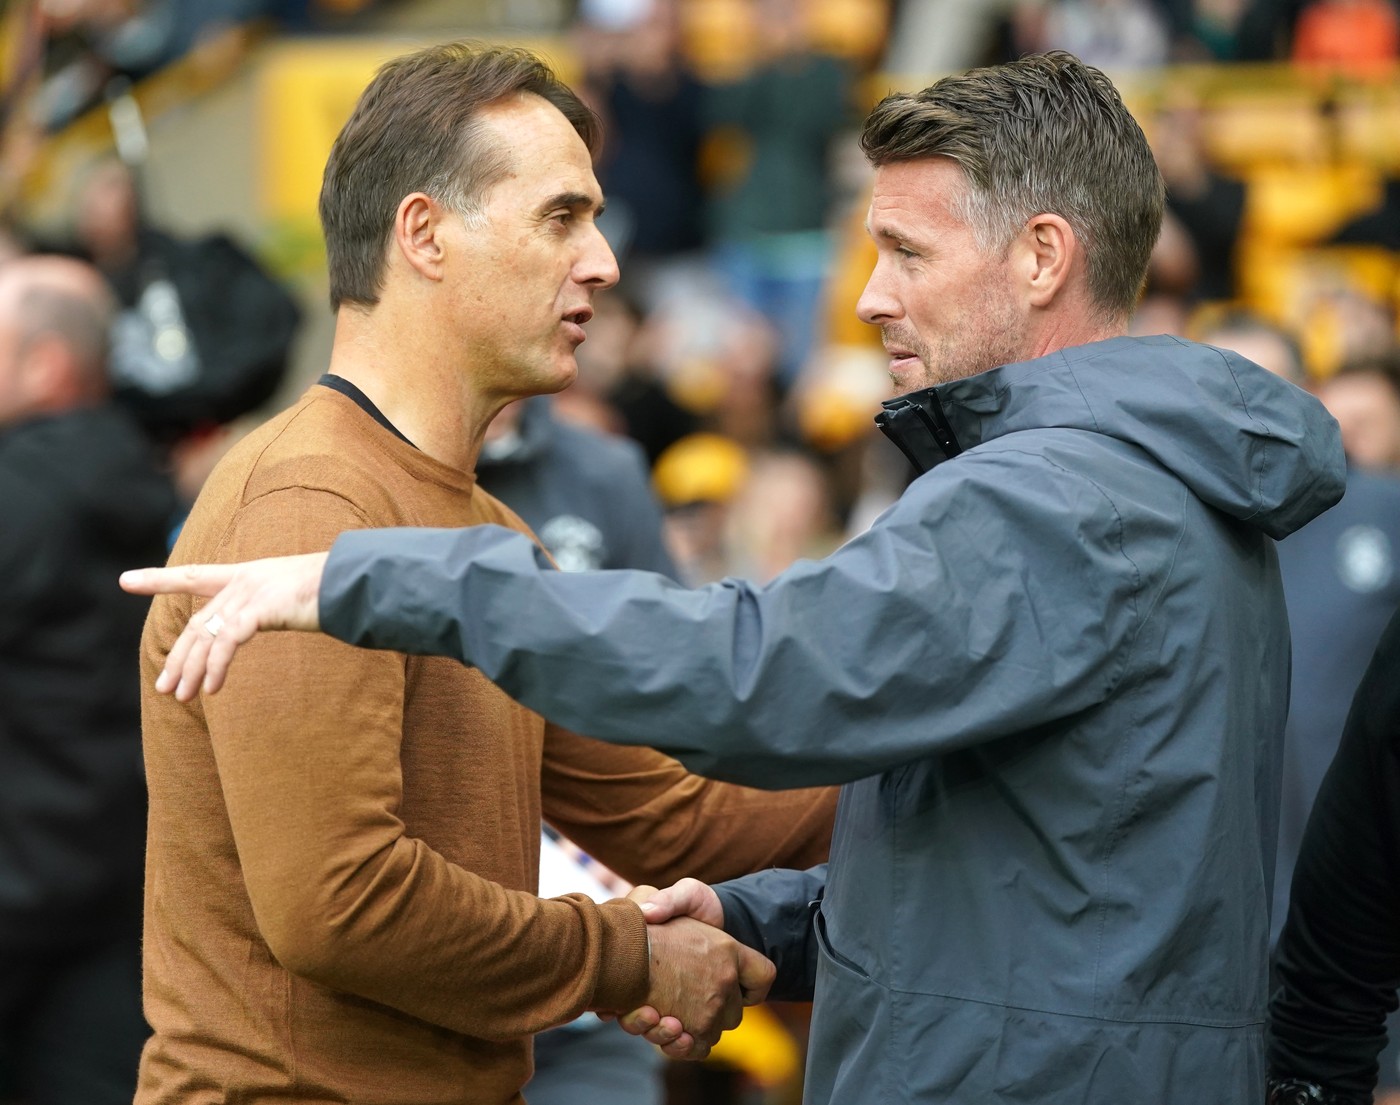 Wolverhampton Wanderers manager Julen Lopetegui greets Luton Town manager Rob Edwards ahead of the pre-season friendly match at the Molineux Stadium, Wolverhampton. Picture date: Wednesday August 2, 2023.,Image: 793847592, License: Rights-managed, Restrictions: Use subject to restrictions. Editorial use only, no commercial use without prior consent from rights holder., Model Release: no, Credit line: Nick Potts / PA Images / Profimedia